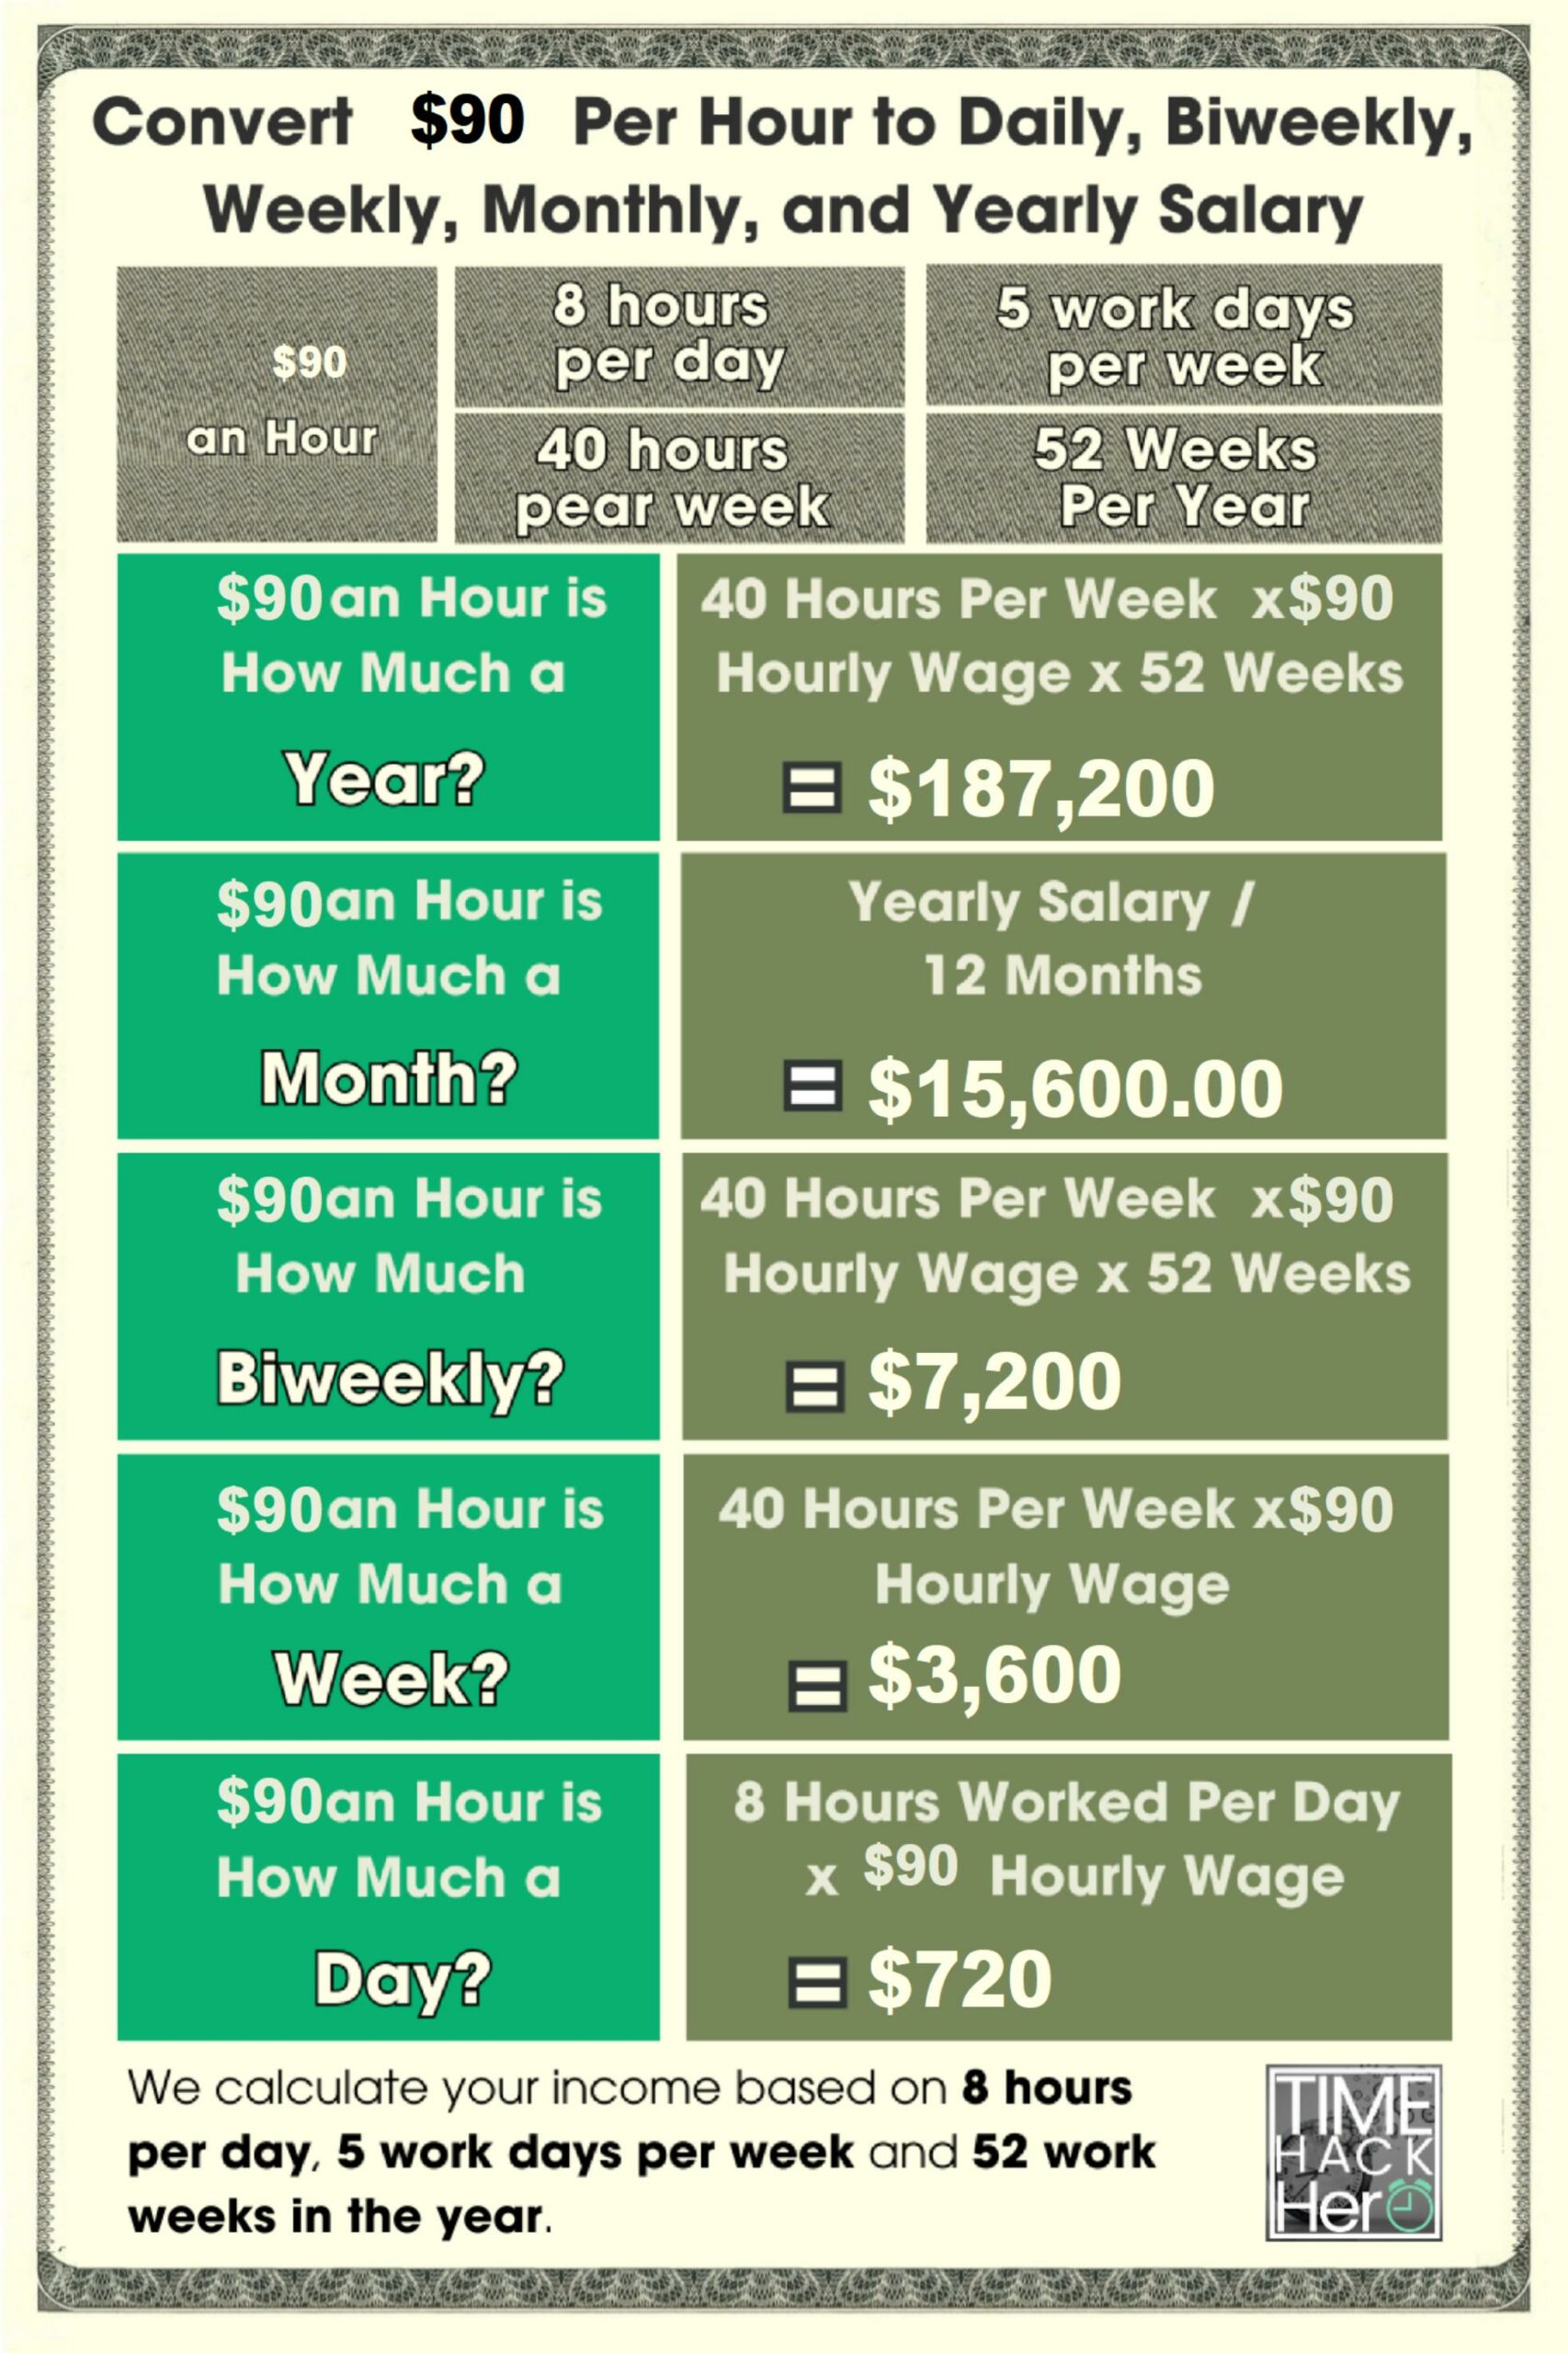 Convert $90 Per Hour to Weekly, Monthly, and Yearly Salary